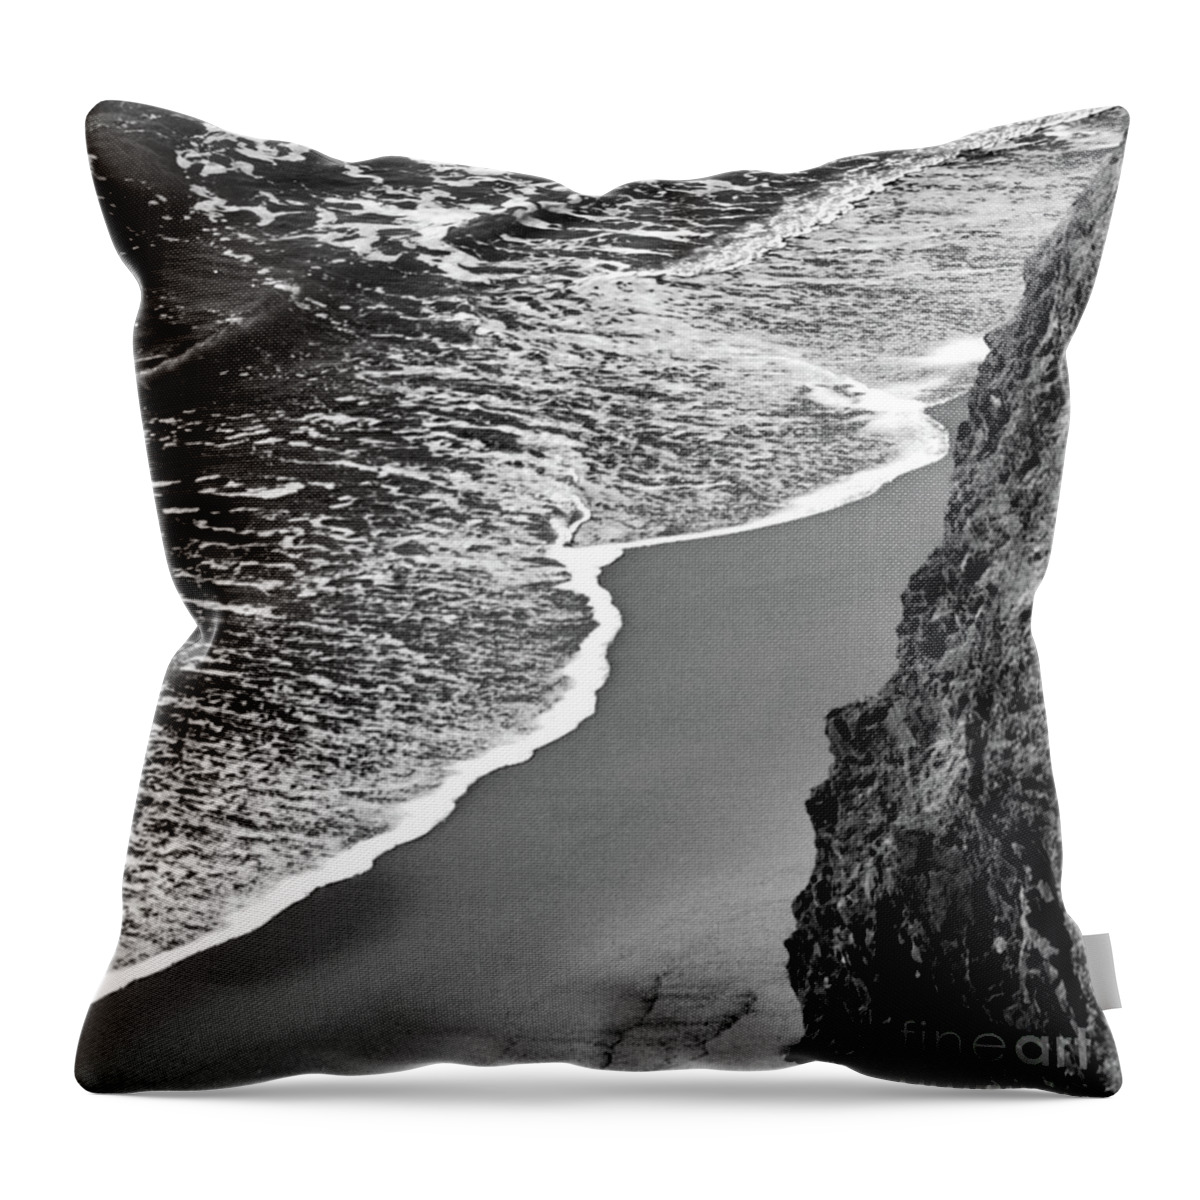 Ocean Throw Pillow featuring the photograph Ocean Wave on Shore by Kimberly Blom-Roemer